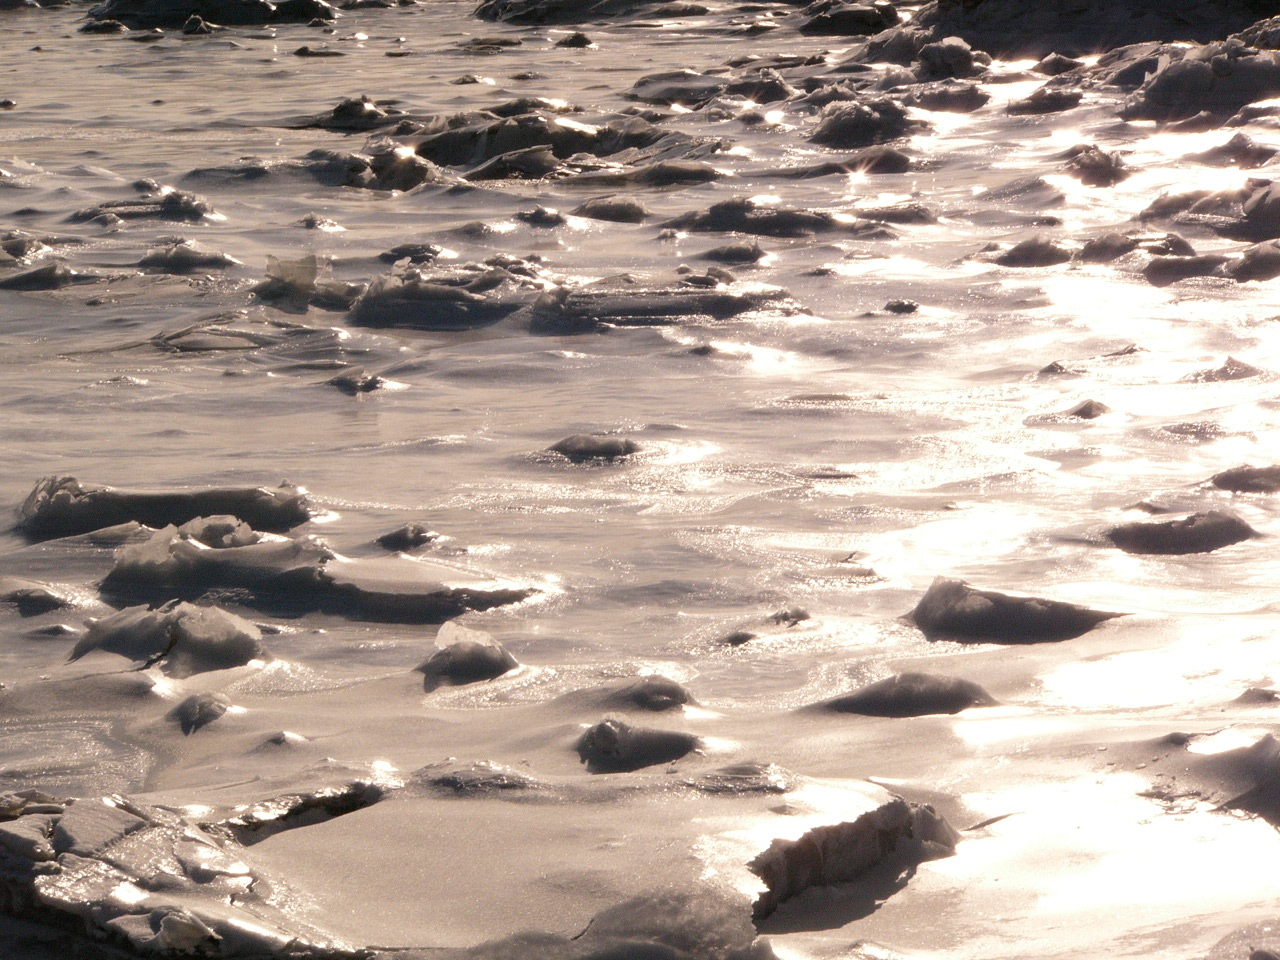 Photo by Kéline Gotman: Sun reflects of ice blocks from northern Québec. The image is close-up, so the ice becomes a landscape without scale.